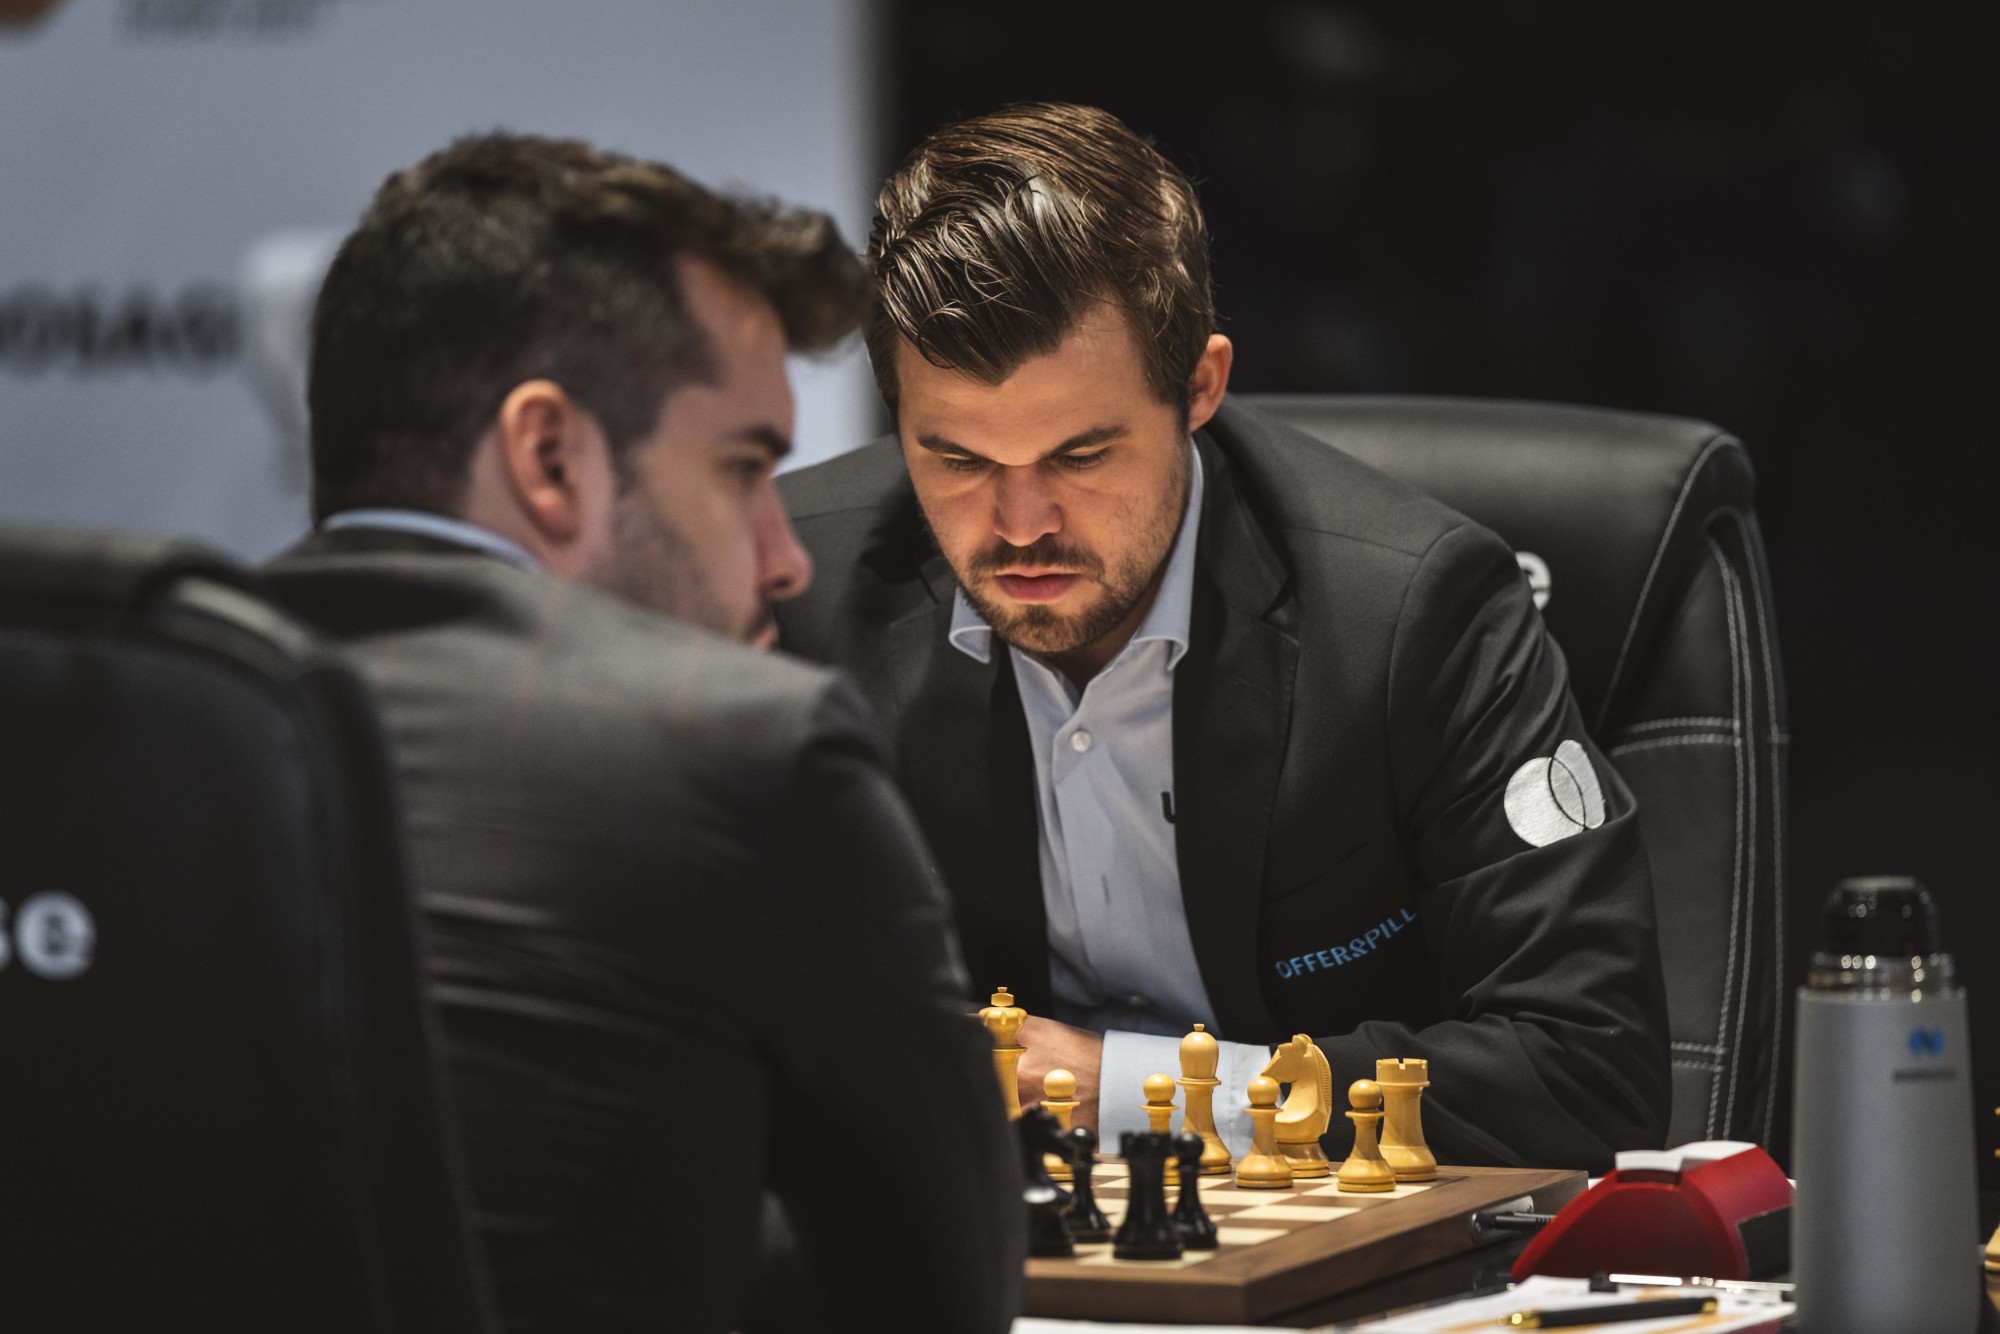 Dark Knight Chess Club IITB on Instagram: The opening round of the FIDE  WCC 2021 between World Champion Magnus Carlsen and Ian Nepomniachtchi lived  up to its hype in a game which